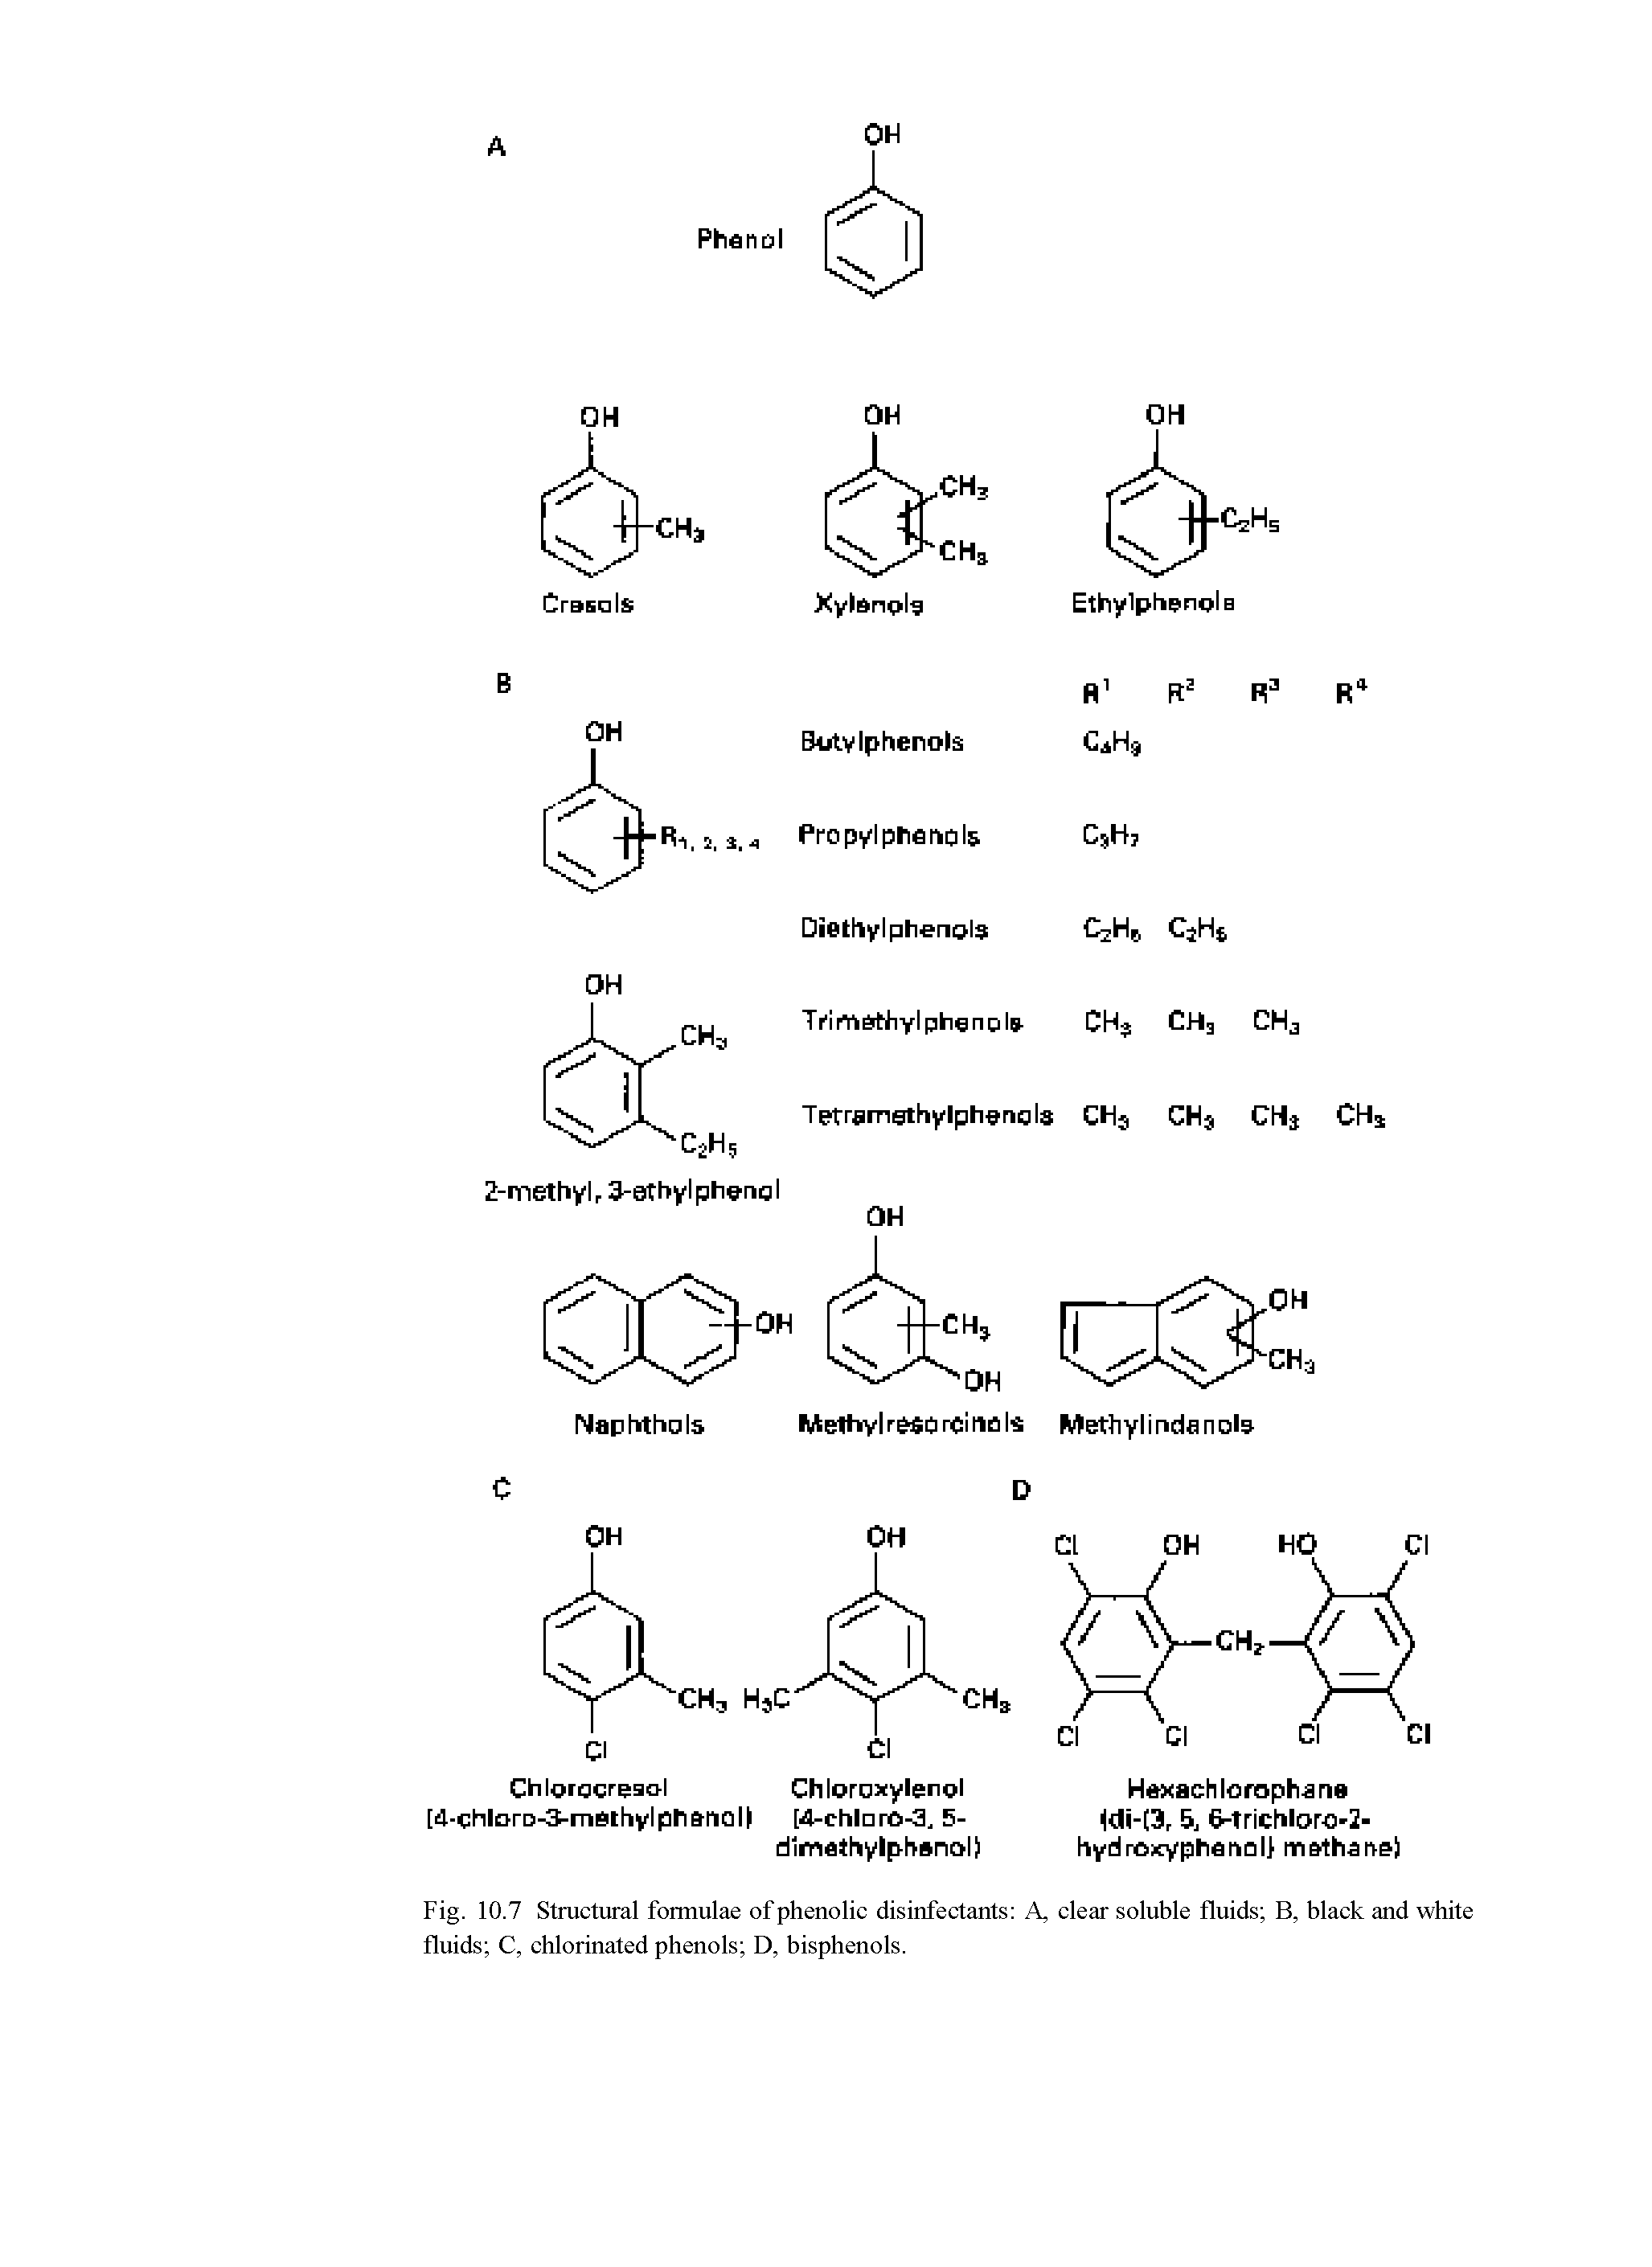 Fig. 10.7 Structural formulae of phenolic disinfectants A, clear soluble fluids B, black and white fluids C, chlorinated phenols D, bisphenols.